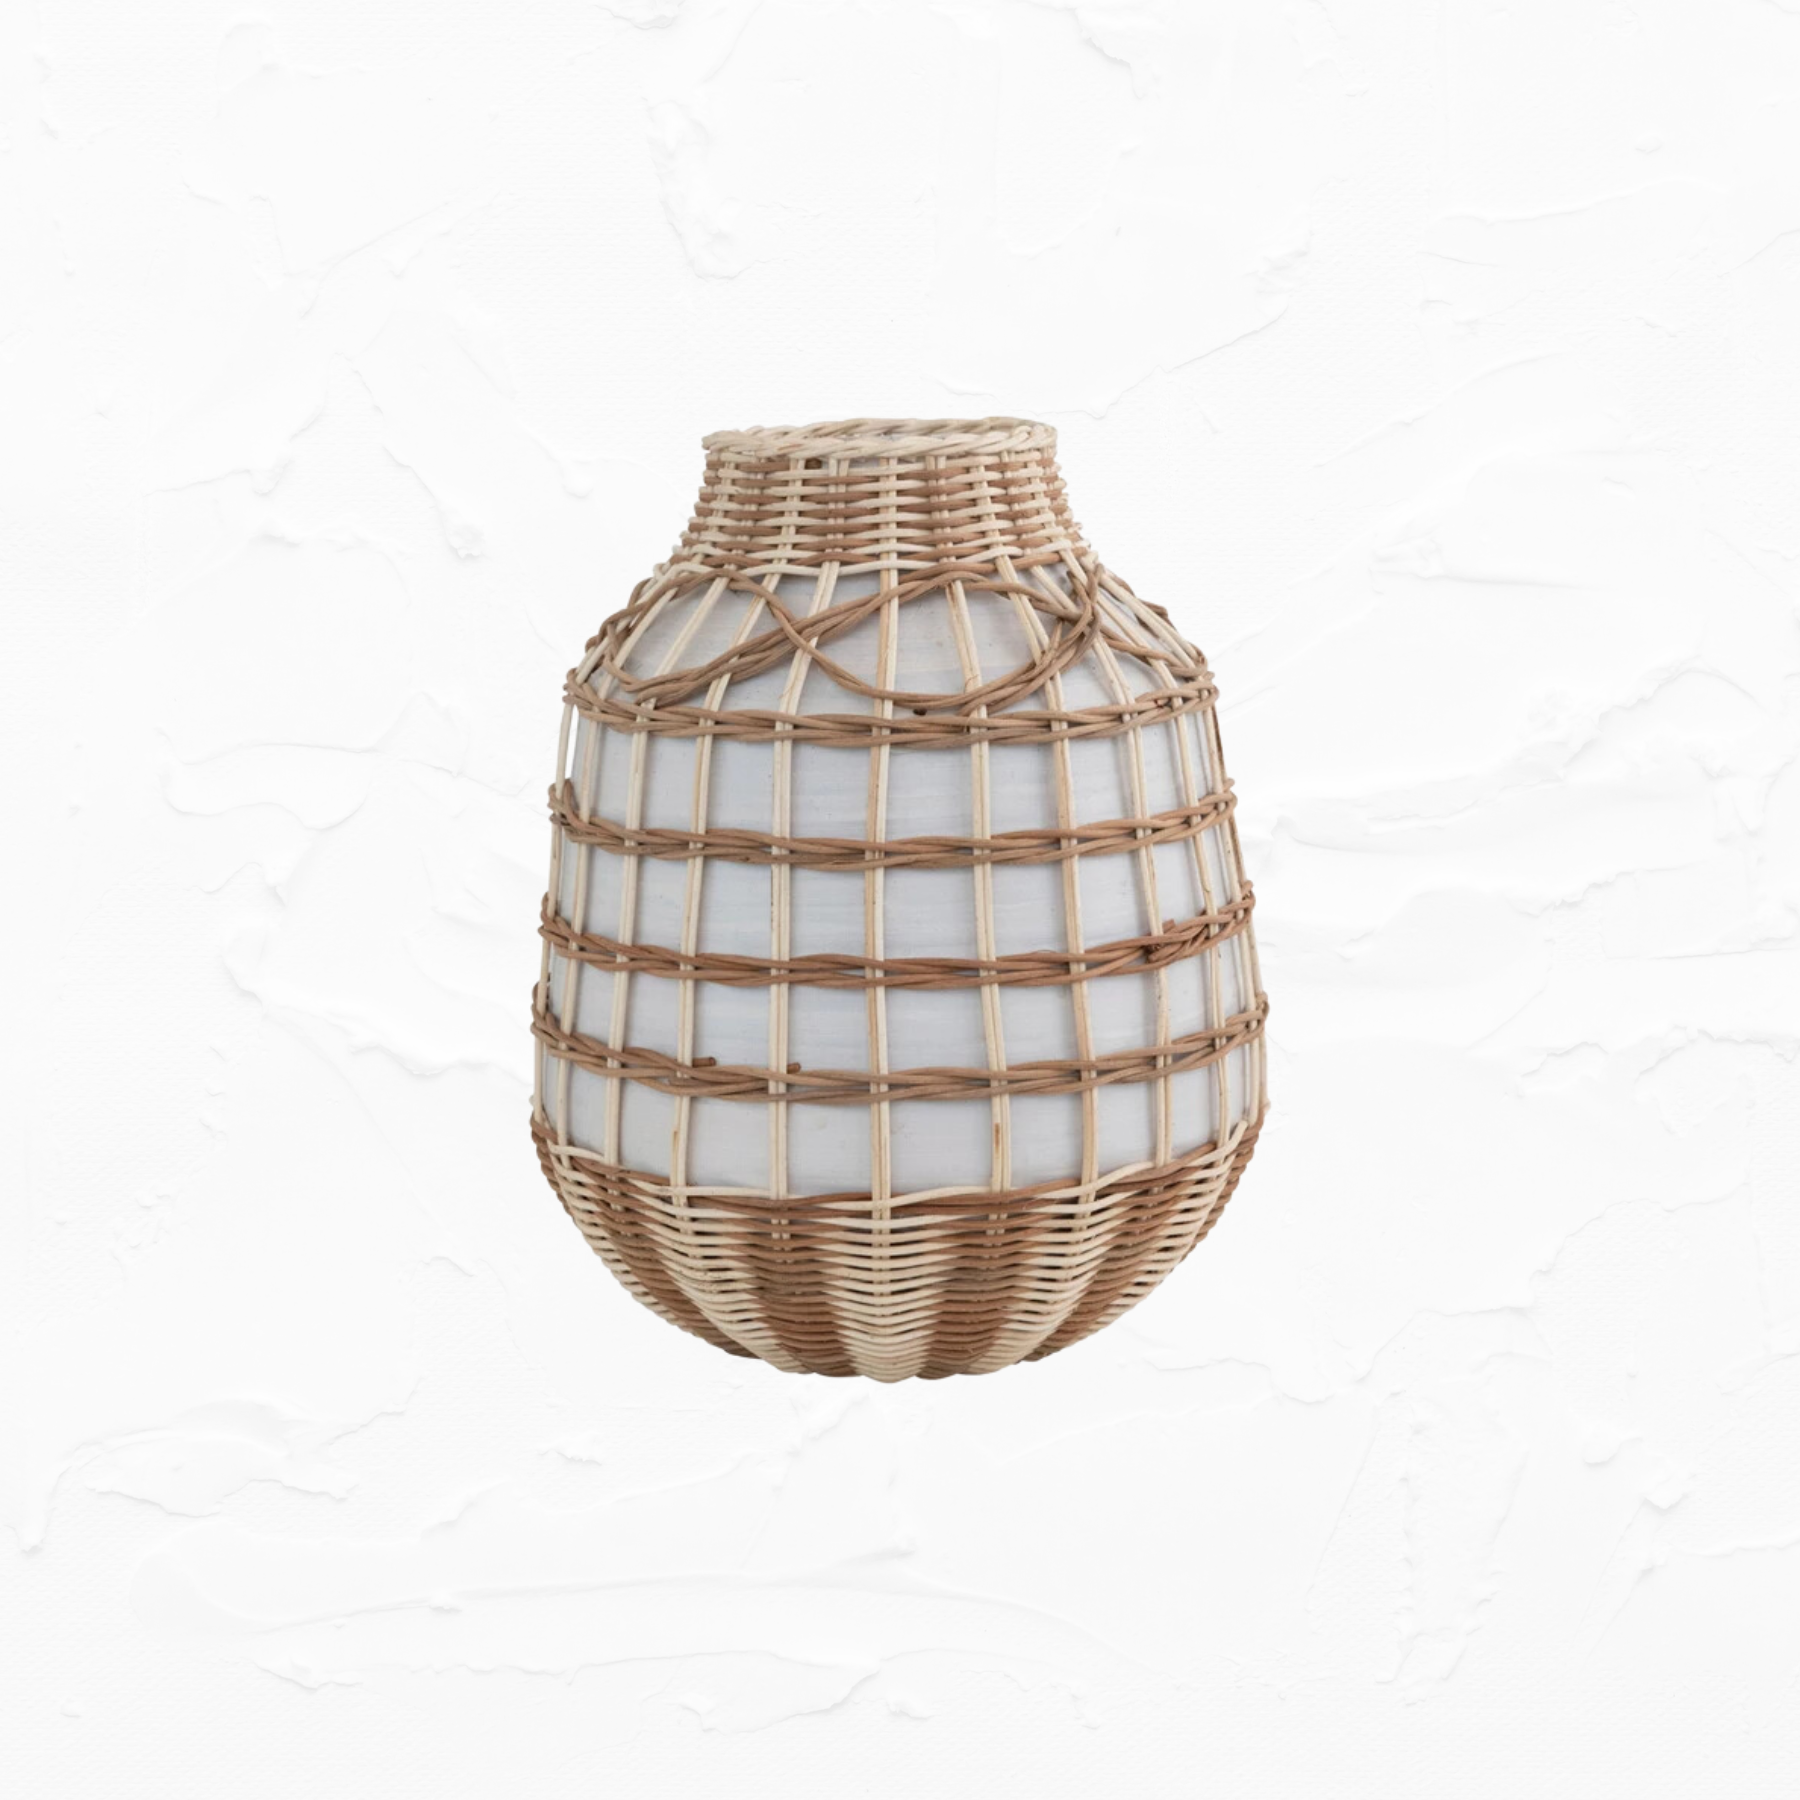 Decorative Hand-Woven Seagrass + Bamboo Wrapped Vase